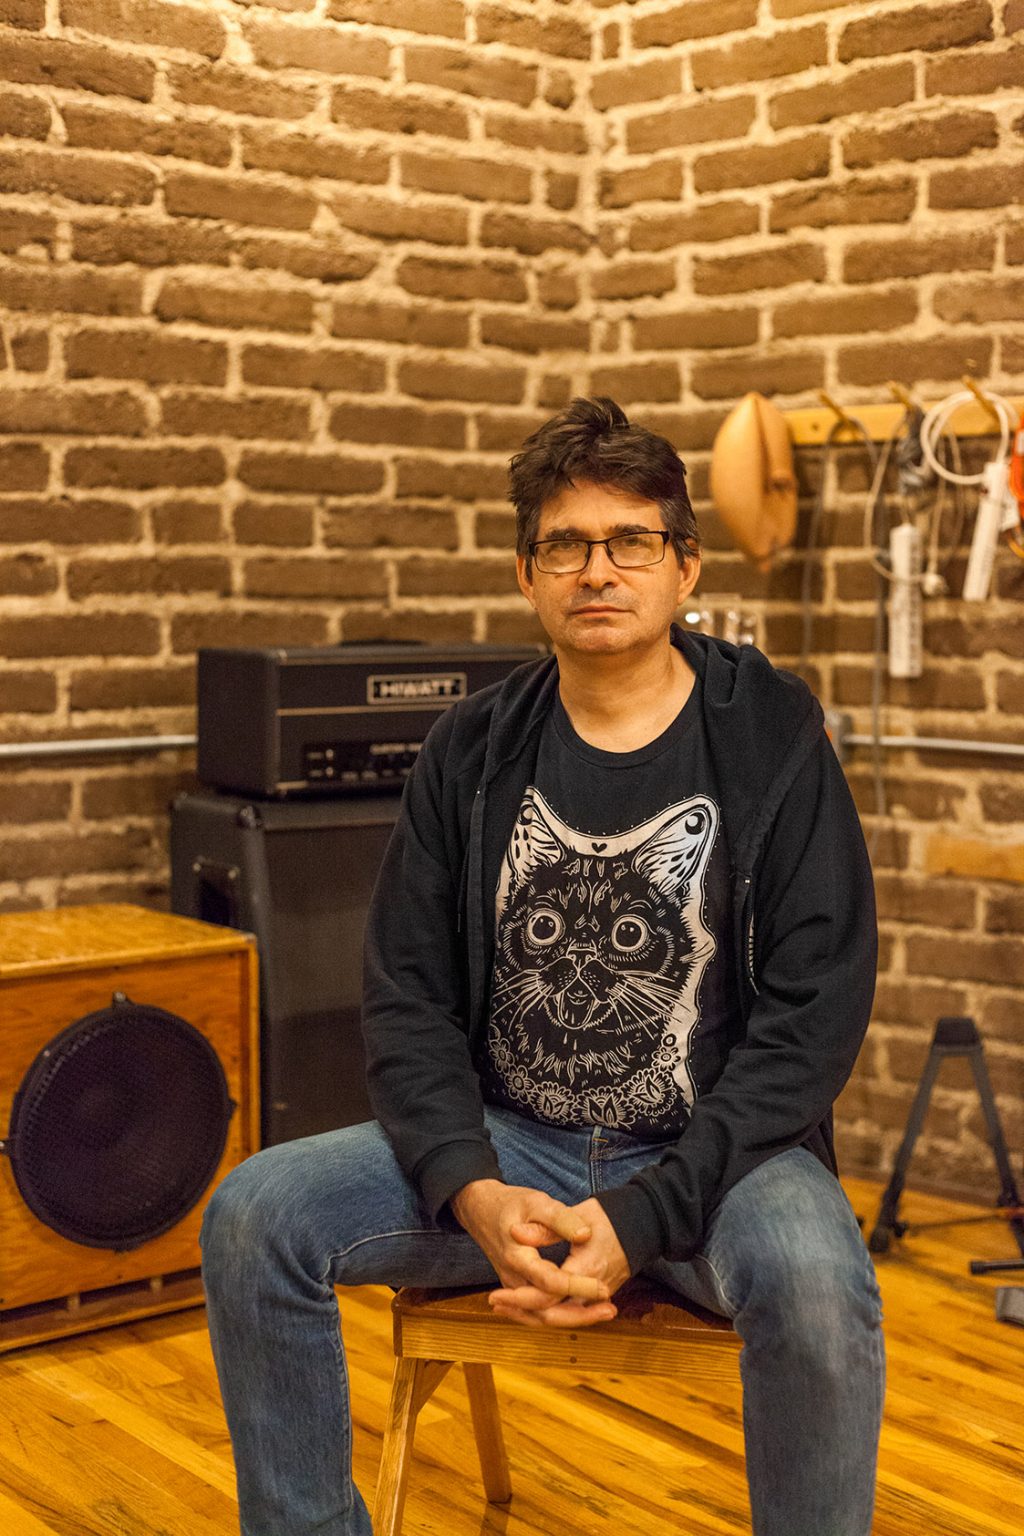 INTERVIEW WITH A PROFESSIONAL – STEVE ALBINI